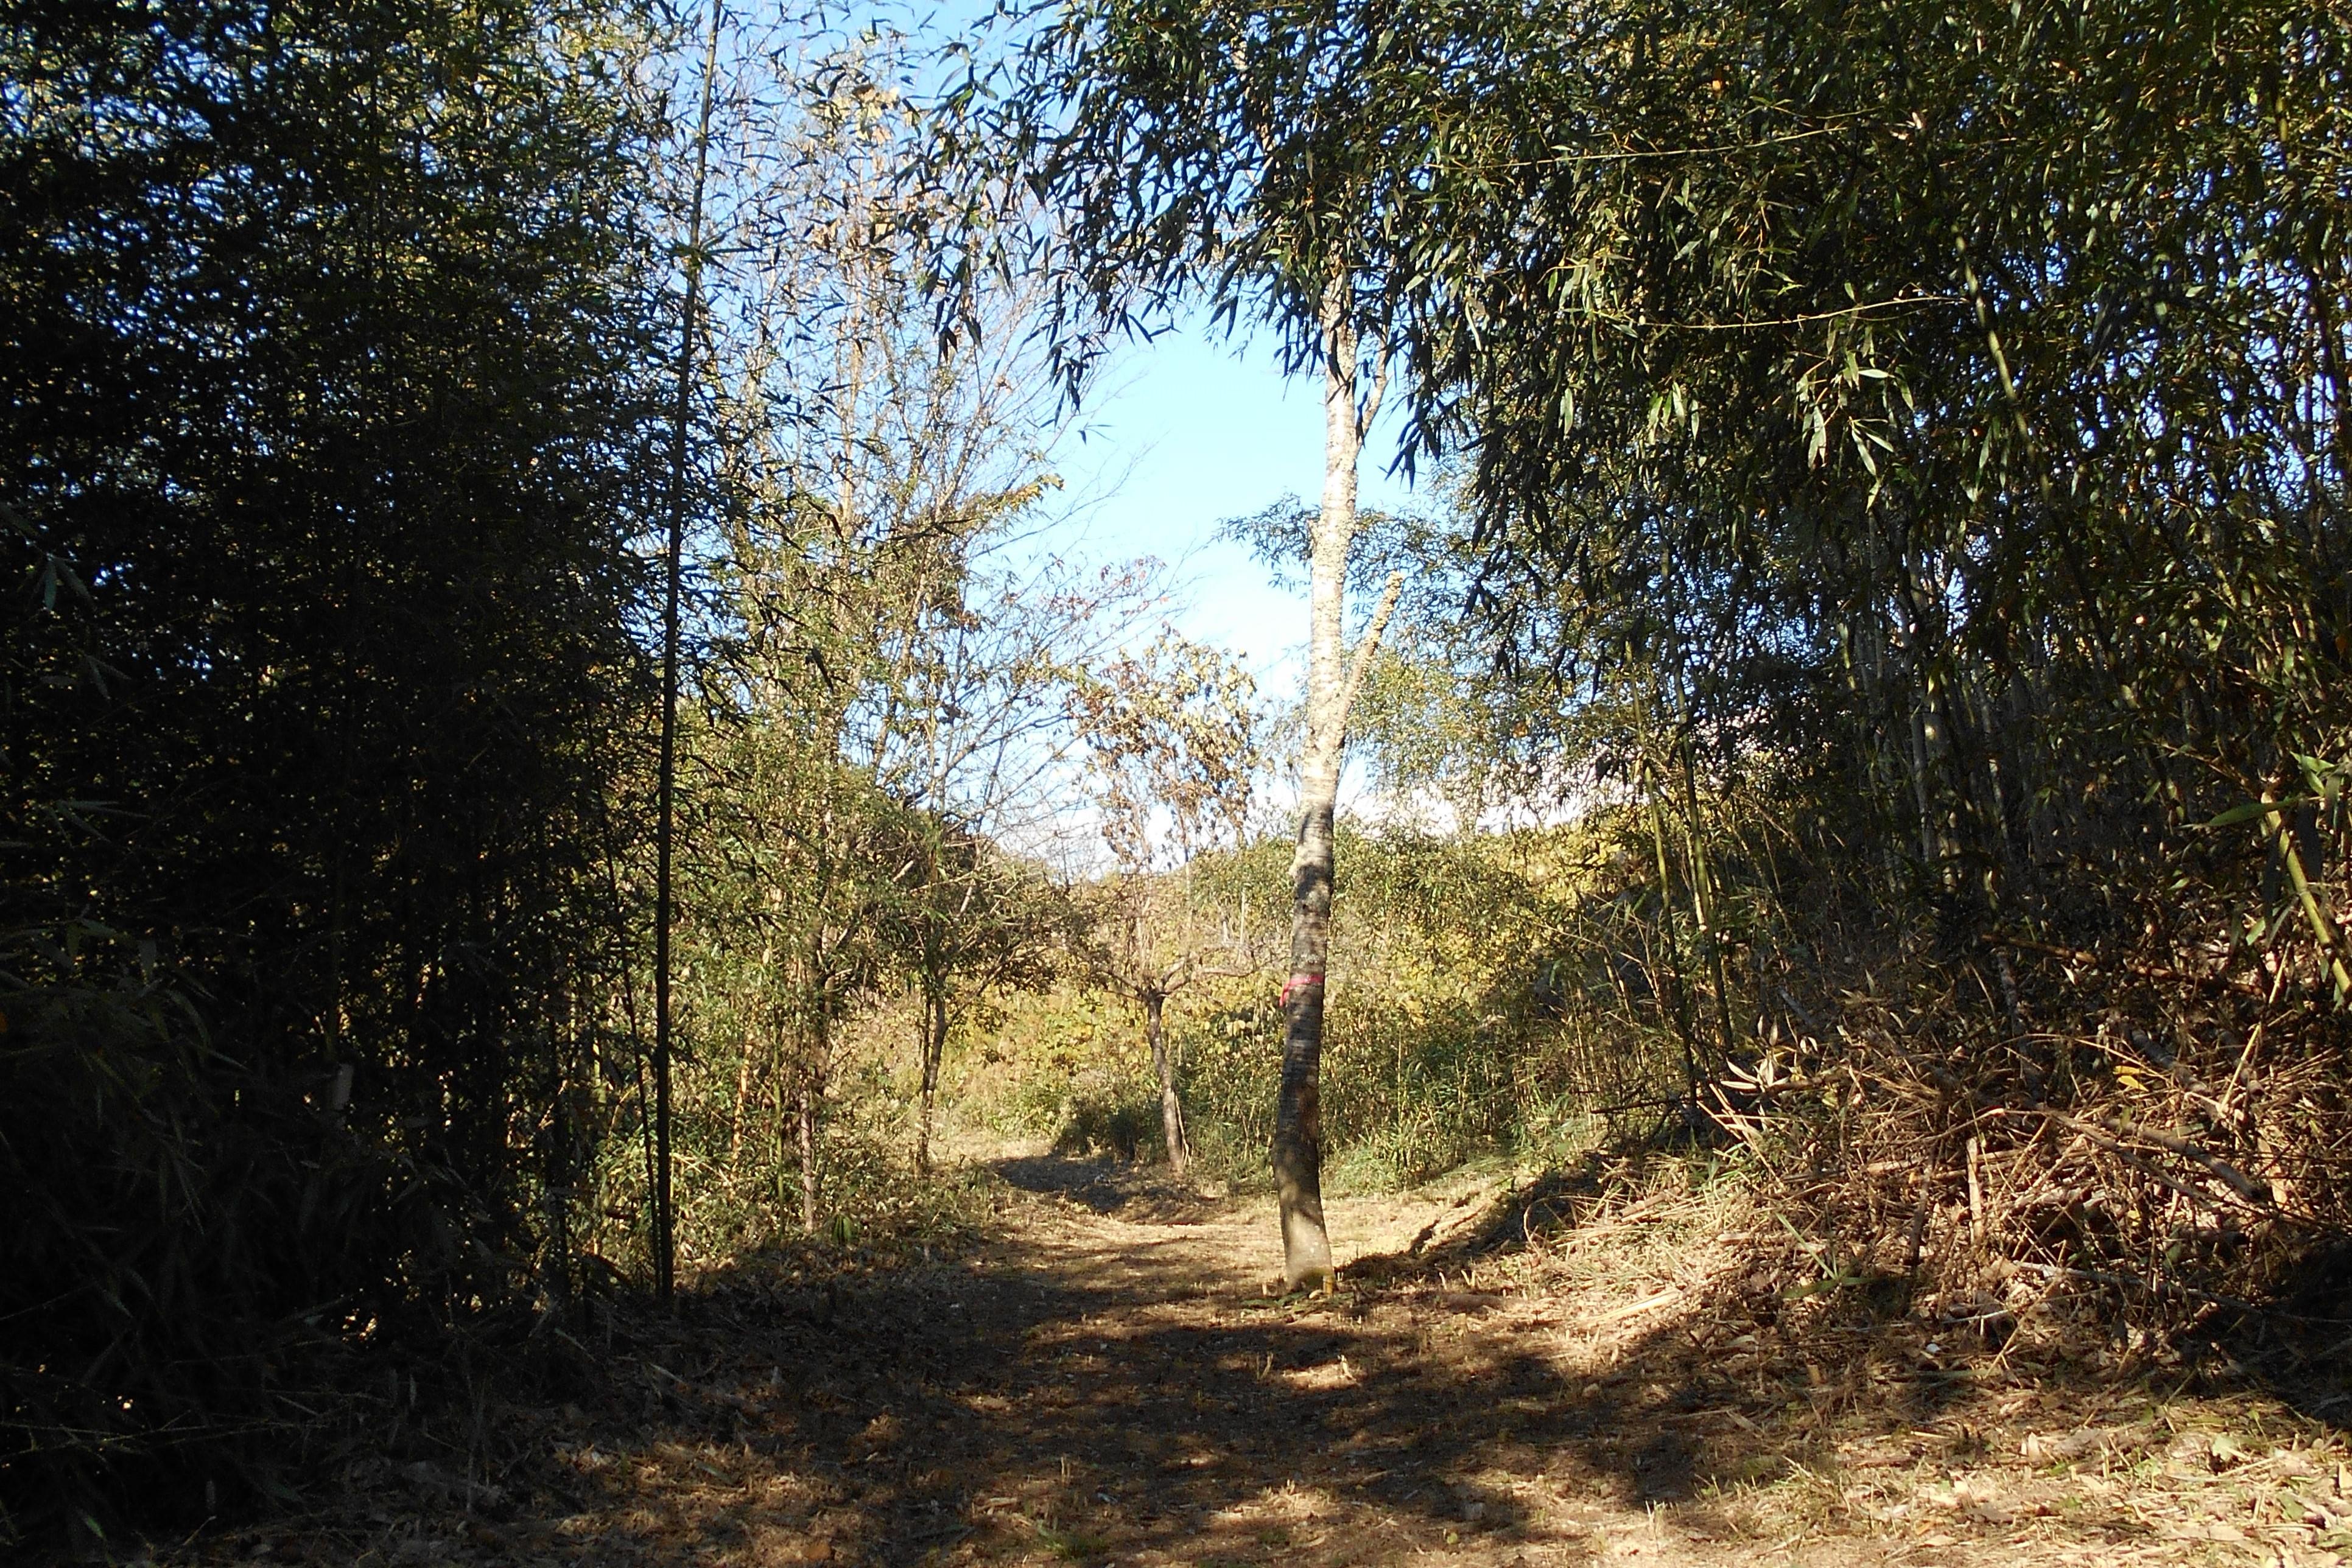 Walkway maintained through forestation activities